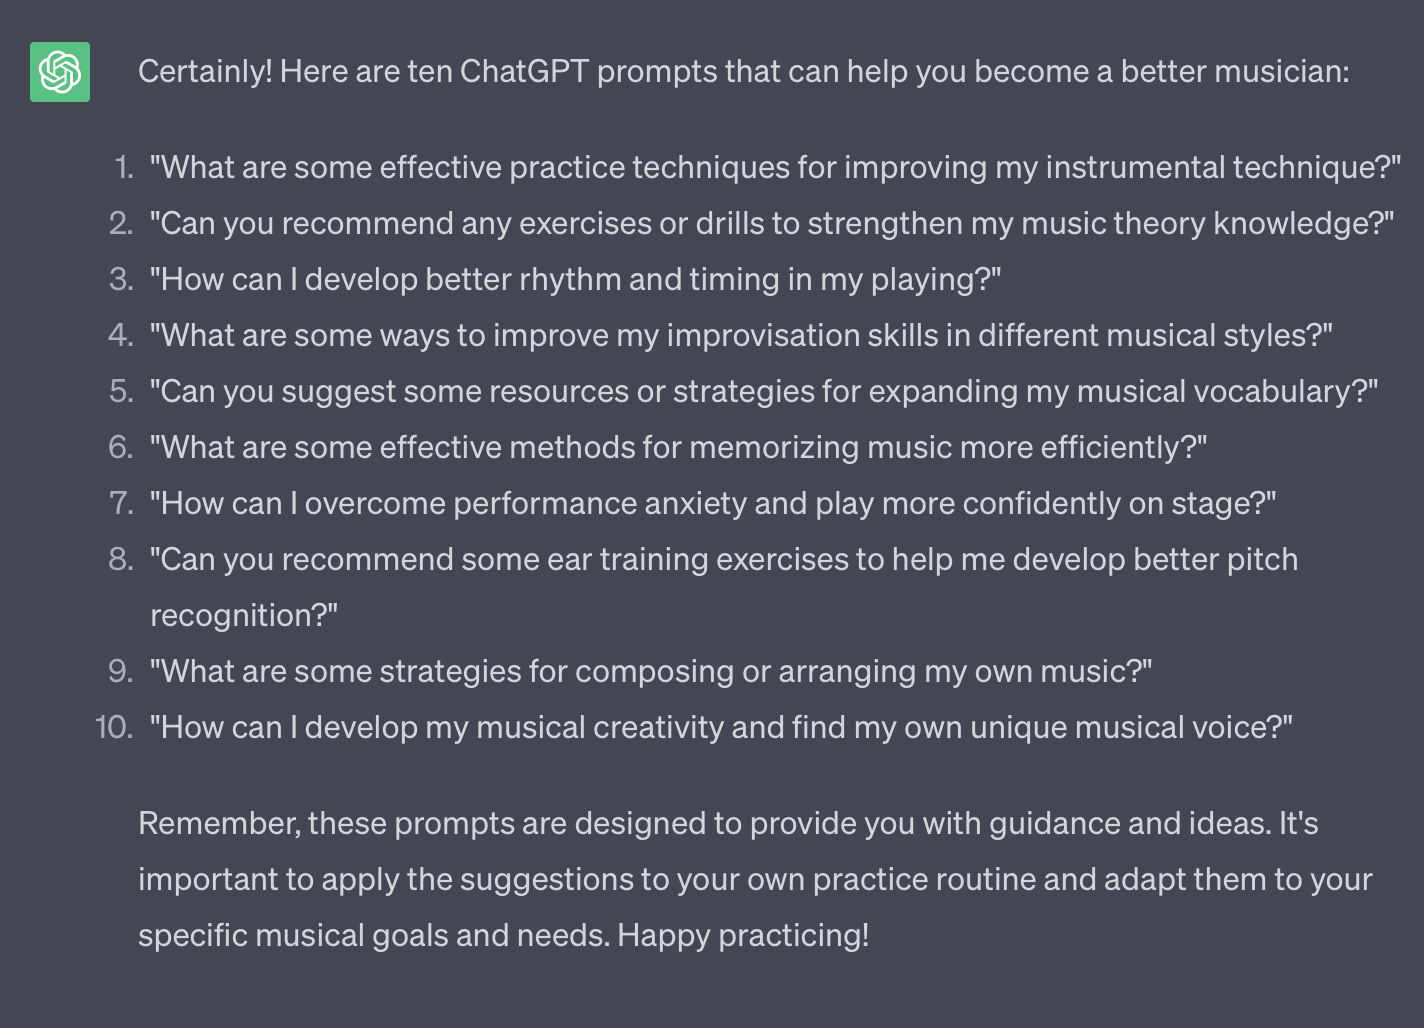 Top 10 ChatGPT prompts for musicians.